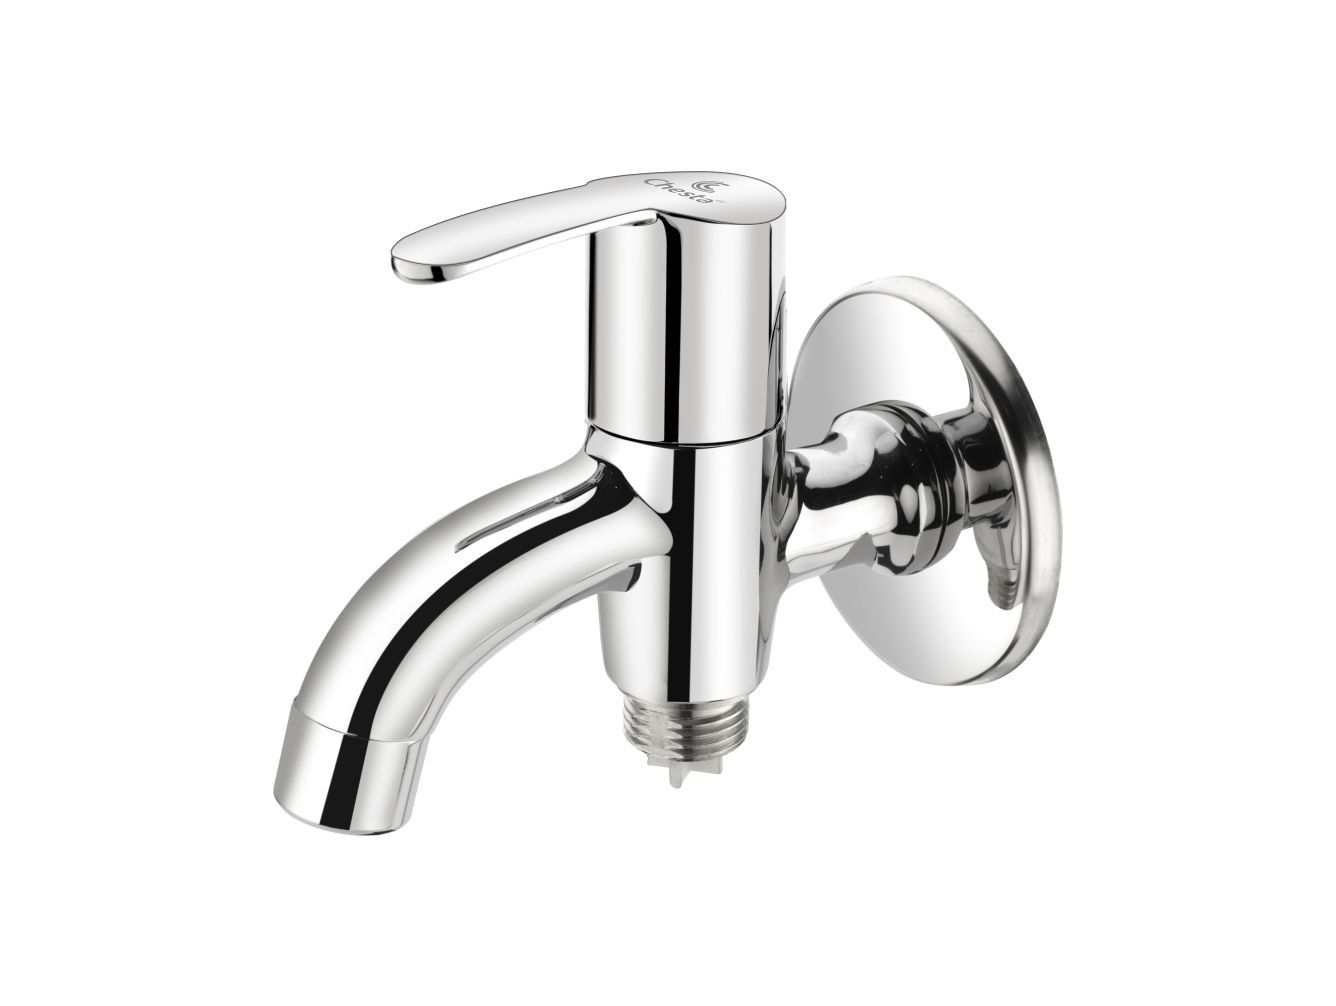 DR - 1006 - 2 in 1 Bib Cock with Wall Flange Bath Fittings